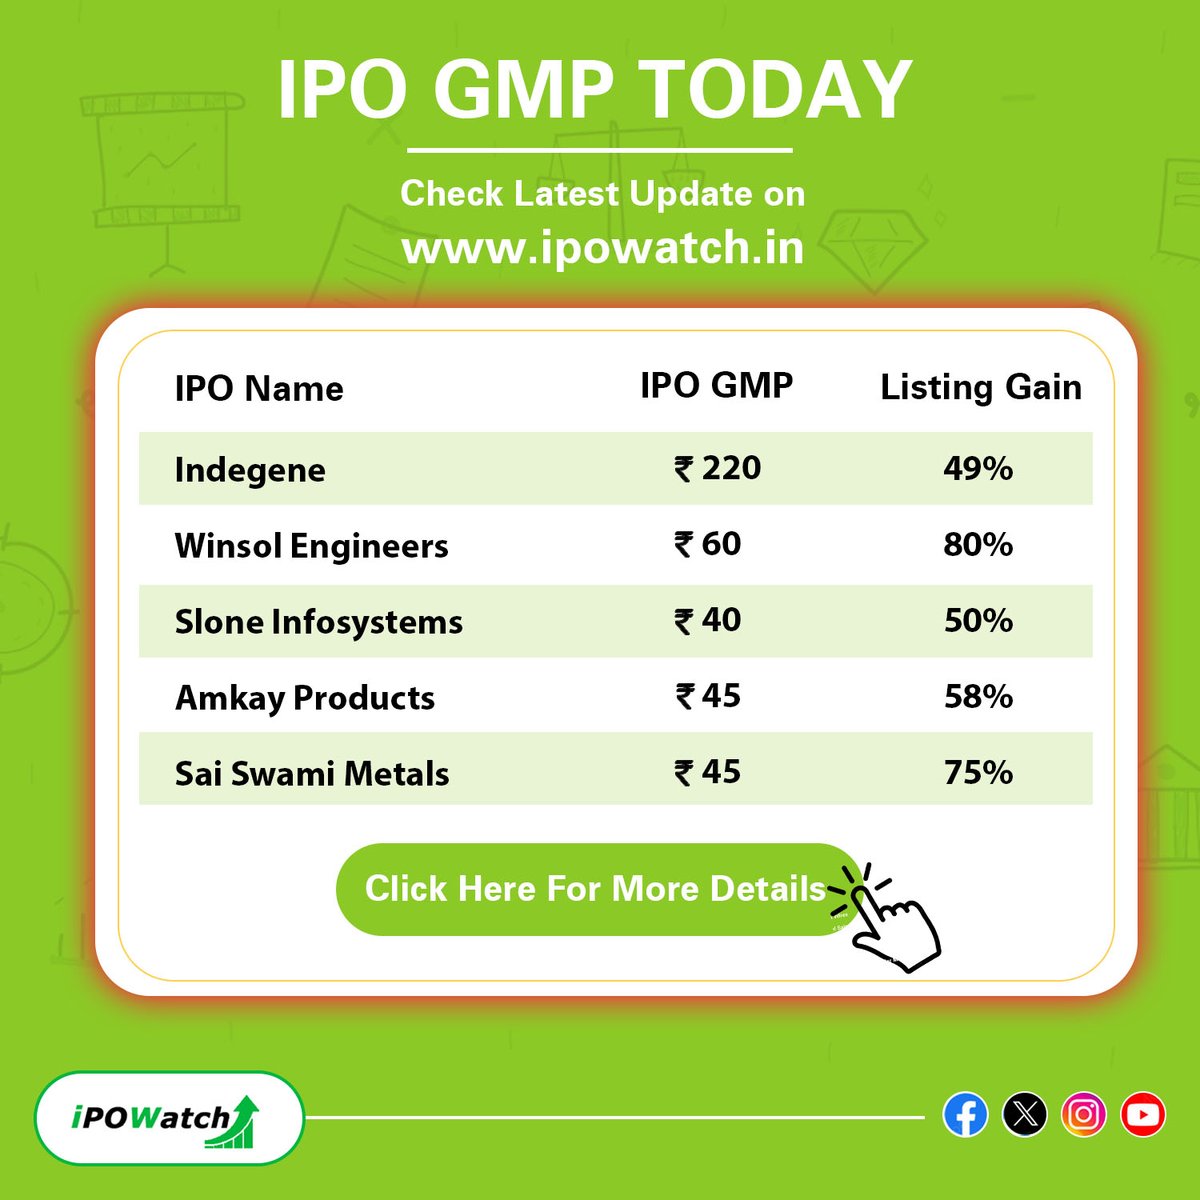 ⮞IPO Alert 🔔Today📍
🔸 #IPOGMP Rates🔔 - ipowatch.in/ipo-grey-marke…

Indegene - ₹220
Amkay Products - ₹45
Racks & Rollers - ₹18
Sai Swami Metals - ₹45
Slone Infosystems - ₹40
Winsol Engineers - ₹60

#ipoupdates #IPO #IPOWatch #ipoalert #sharemarket #ipogmptoday